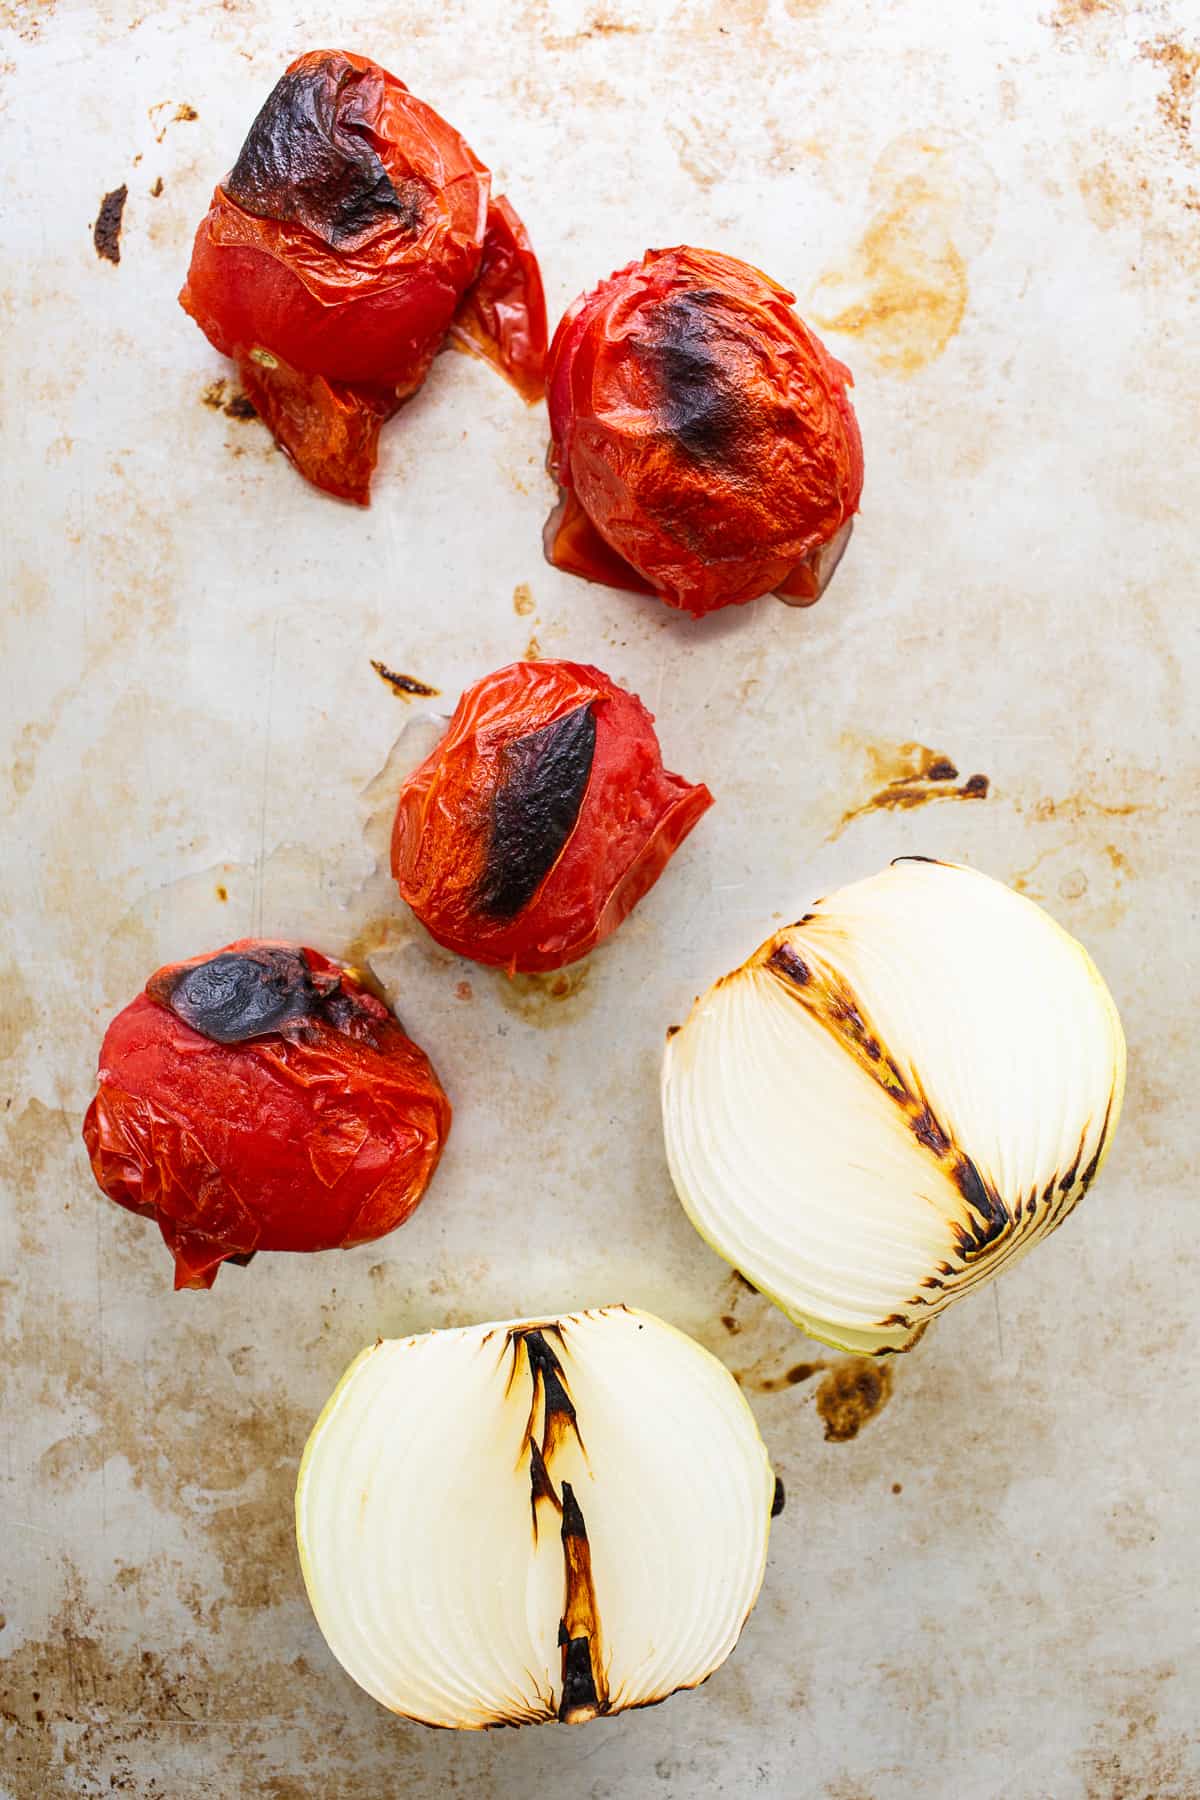 Roasted Roma tomatoes and a white onion on a baking sheet.